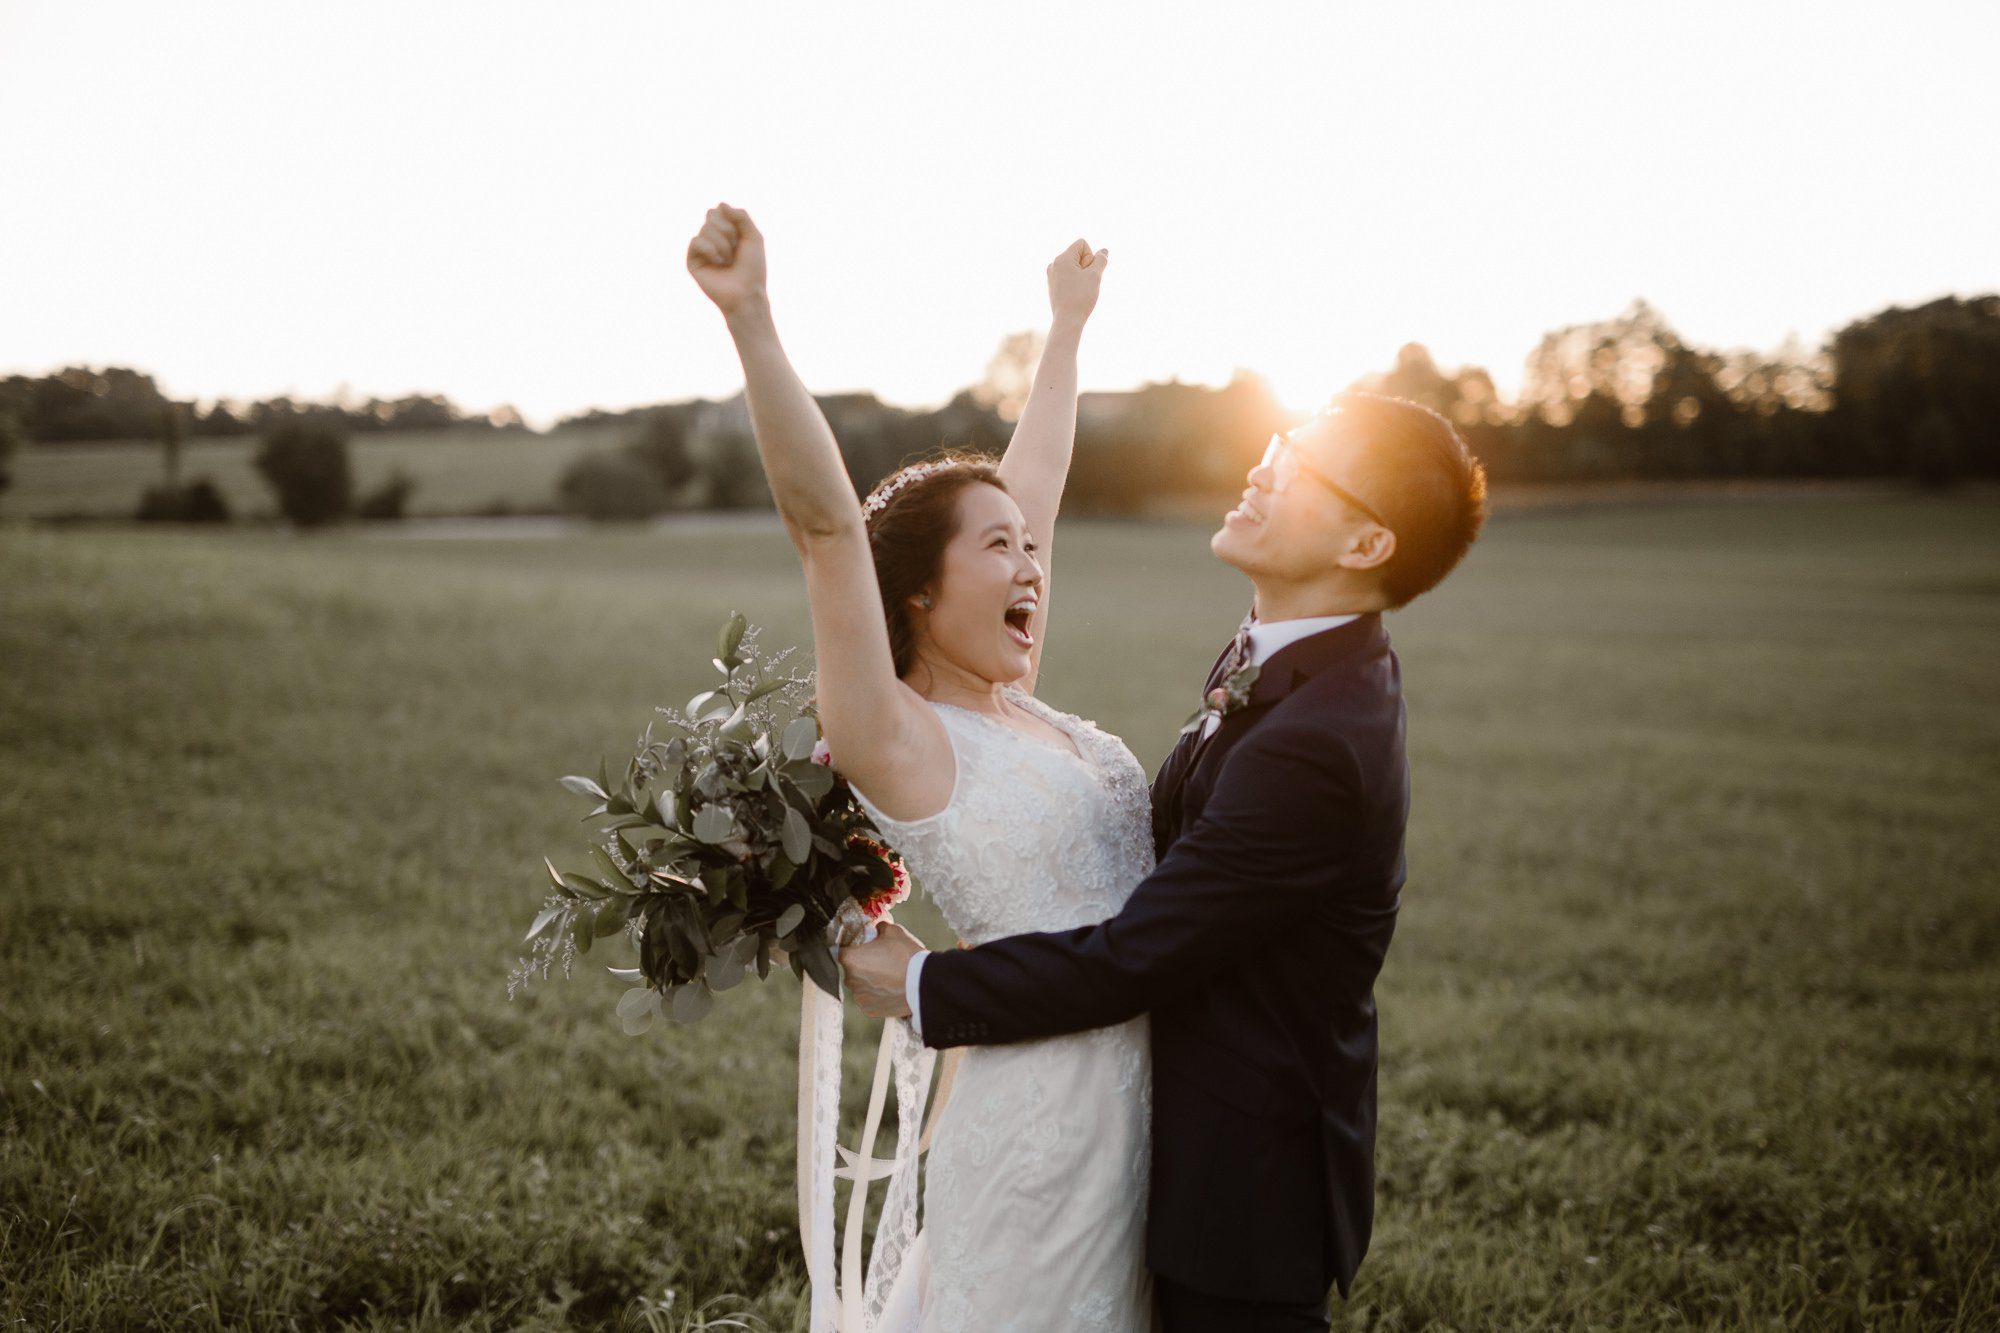 You Budgeted For Your Wedding, But What About Post-Wedding Financial Planning?